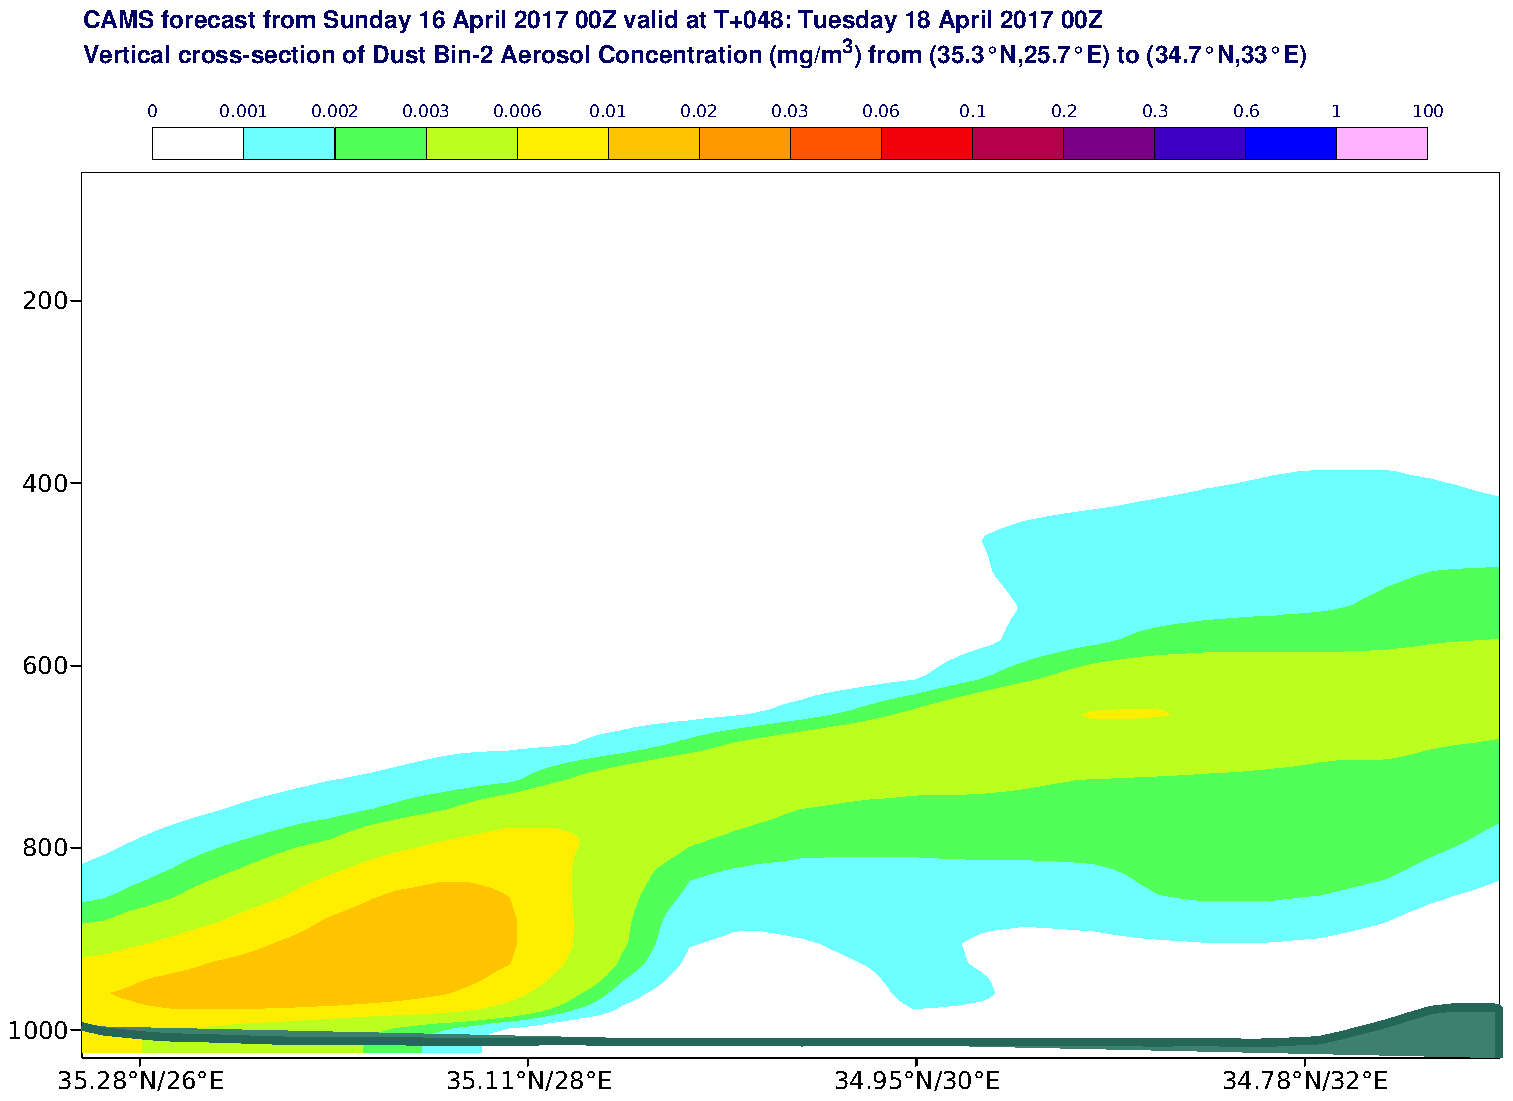 Vertical cross-section of Dust Bin-2 Aerosol Concentration (mg/m3) valid at T48 - 2017-04-18 00:00